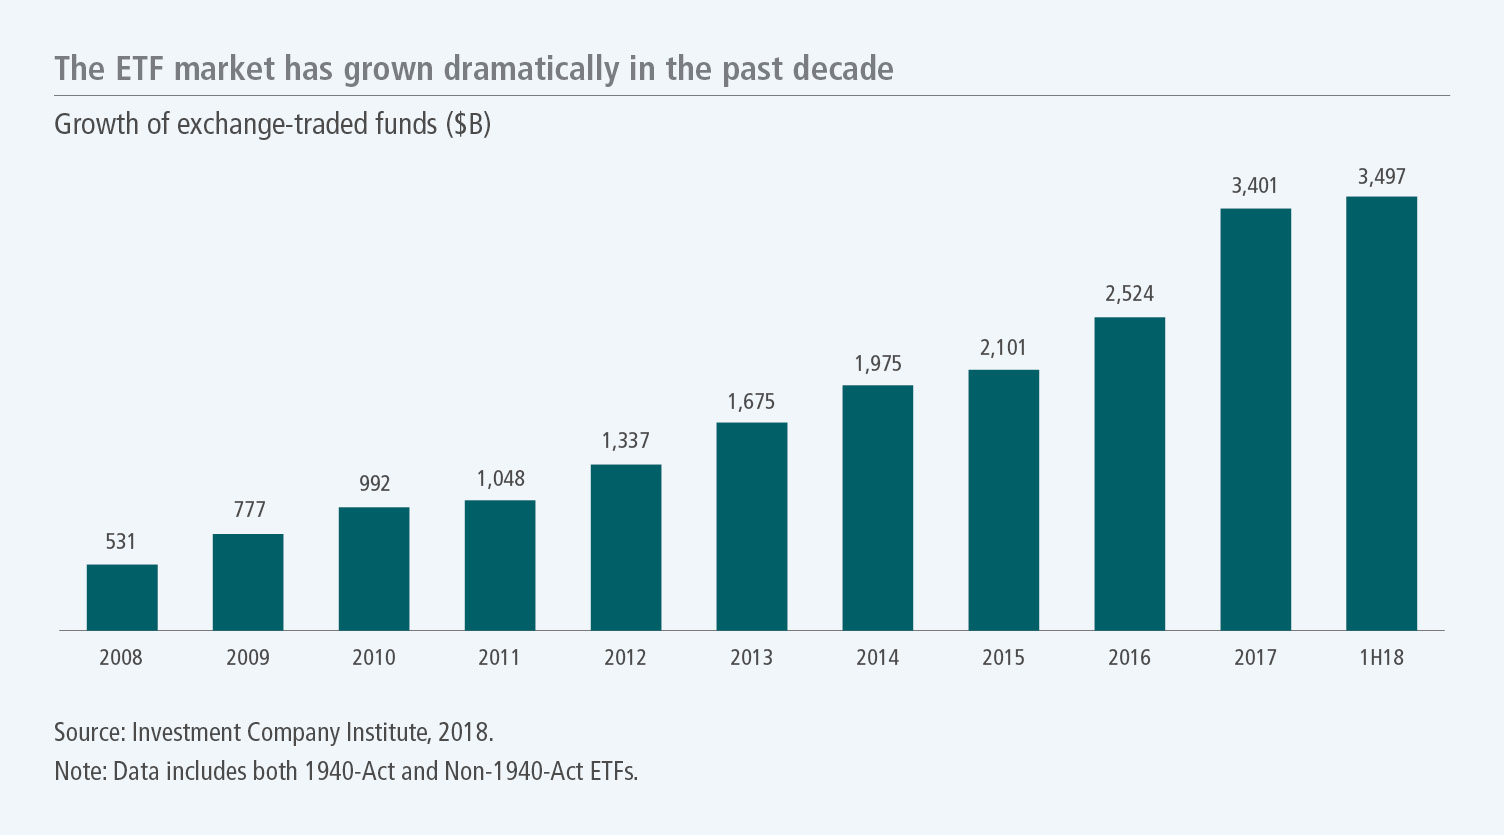 The ETF market has grown dramatically in the past decade